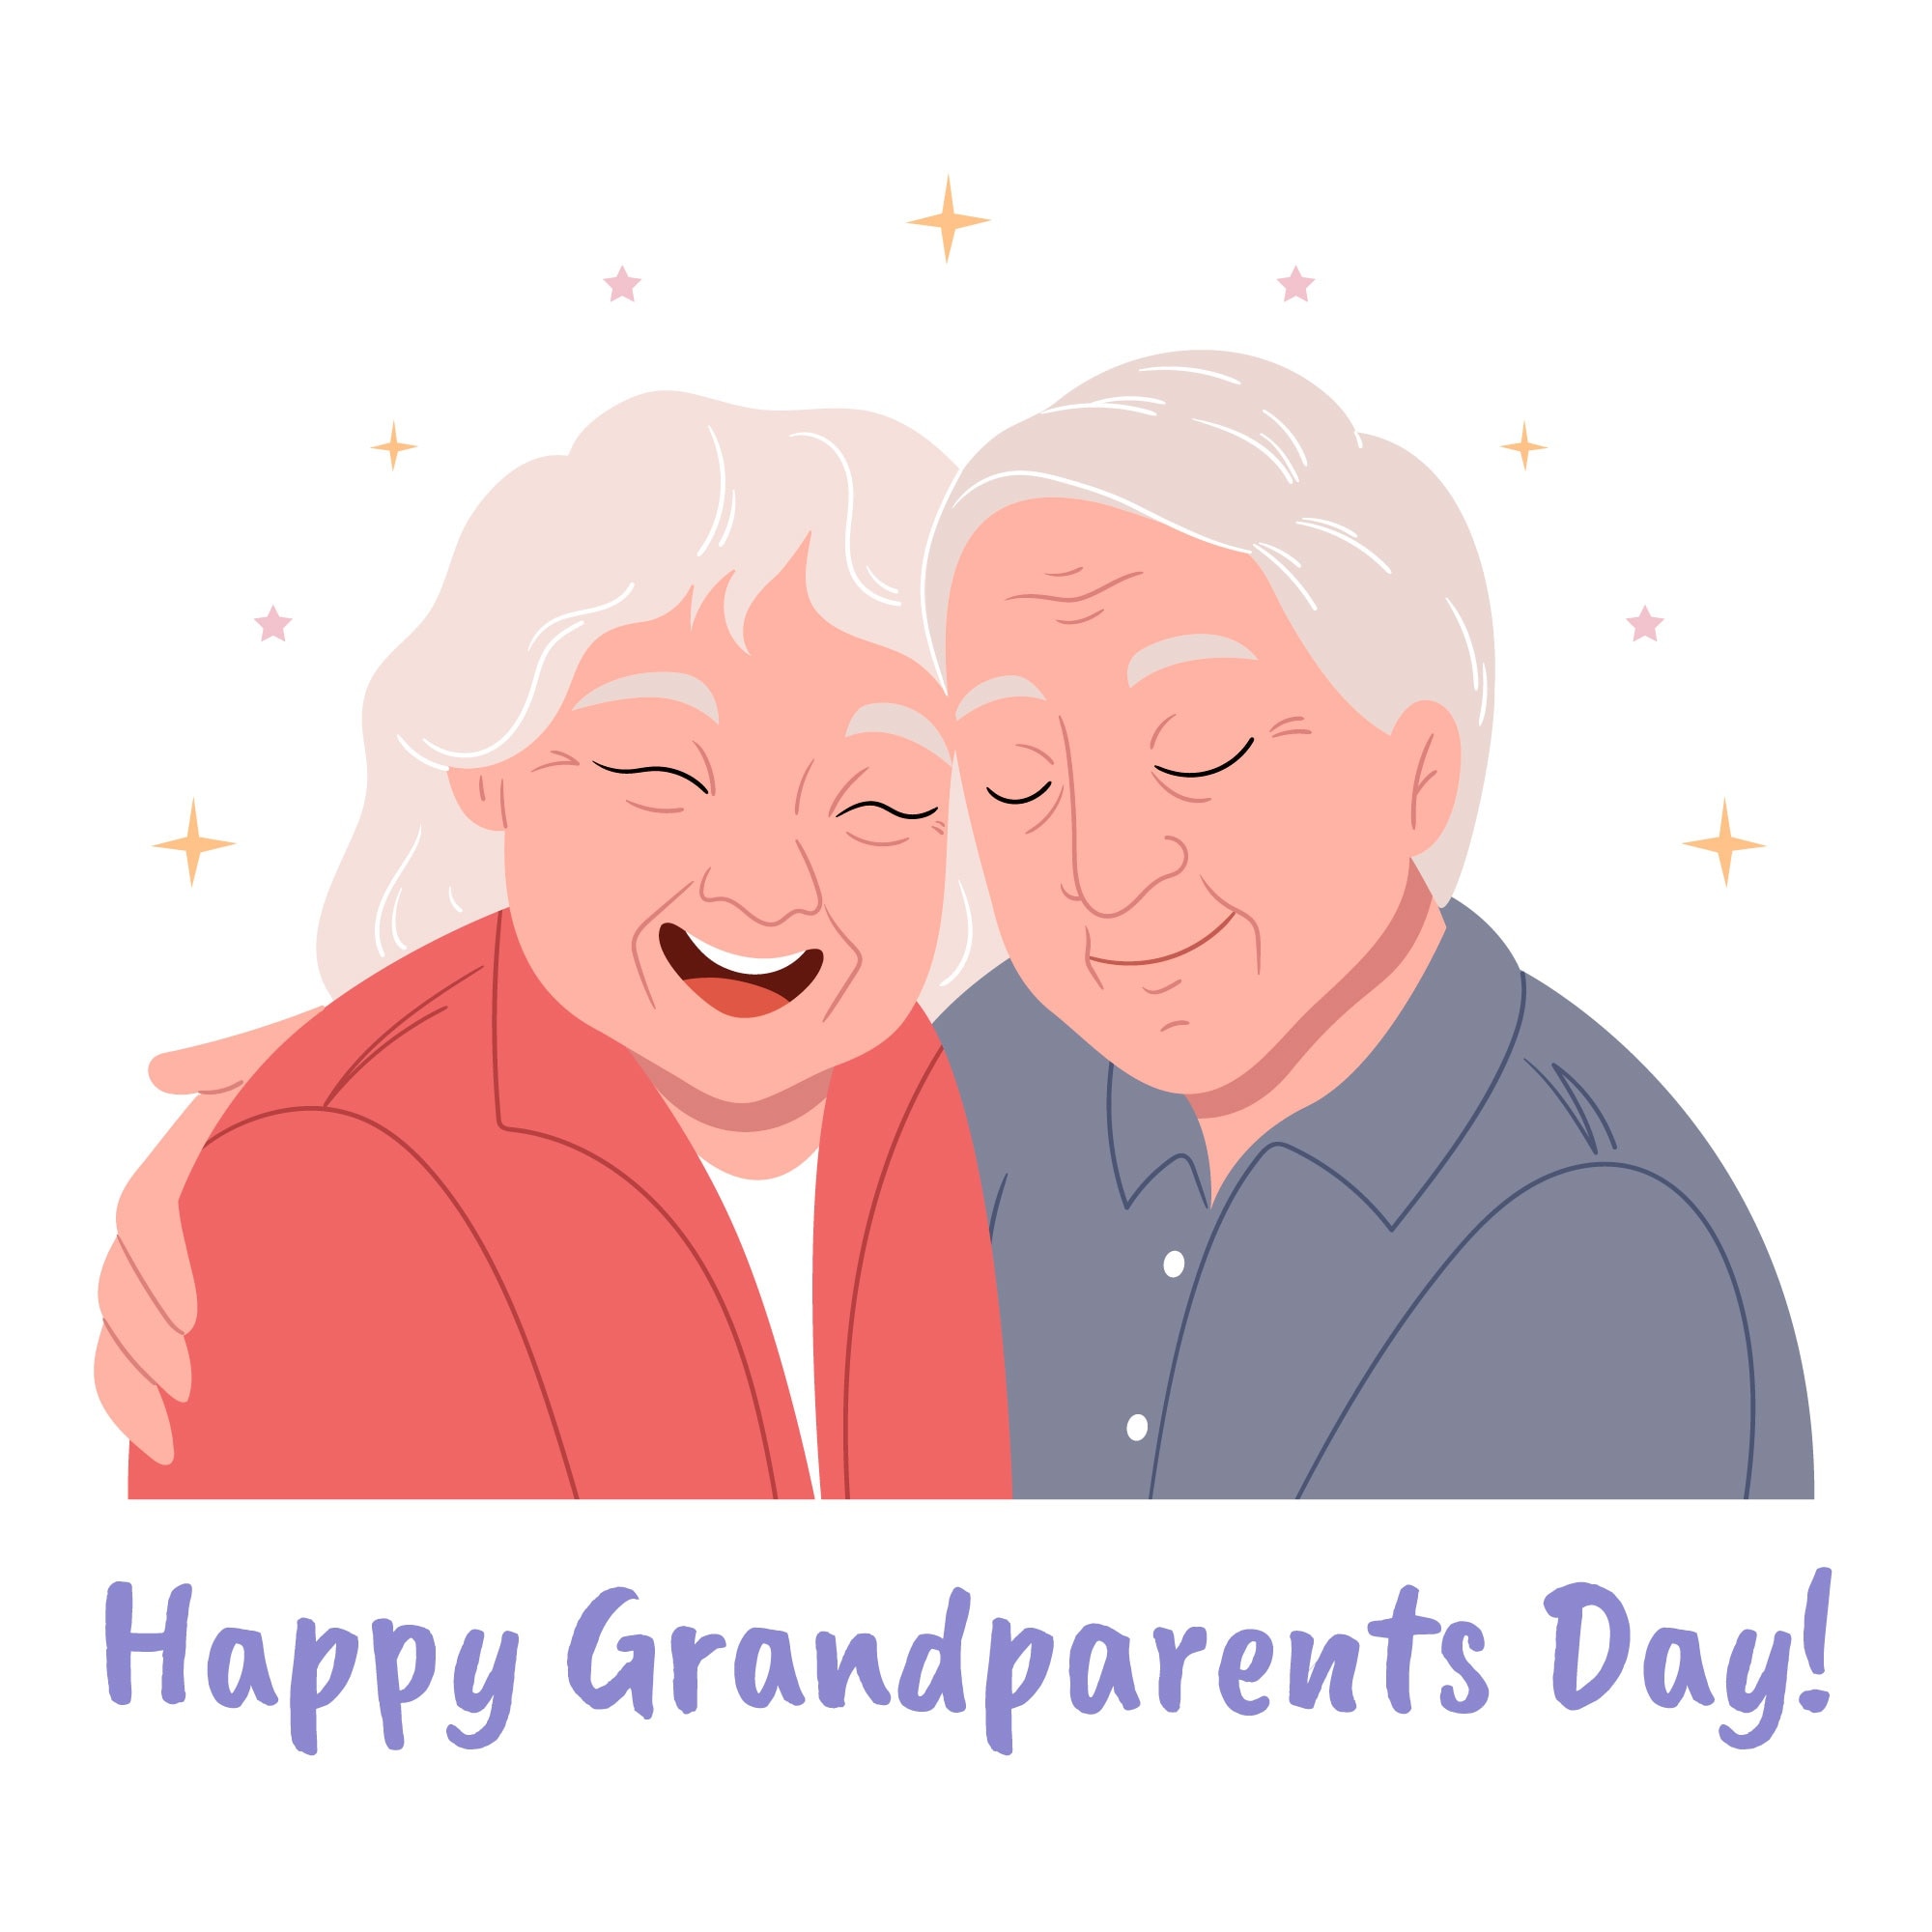 Happy Grandparents' Day 2022: Quotes, Images, Wishes, Messages, Greetings, Prayers, and Slogans